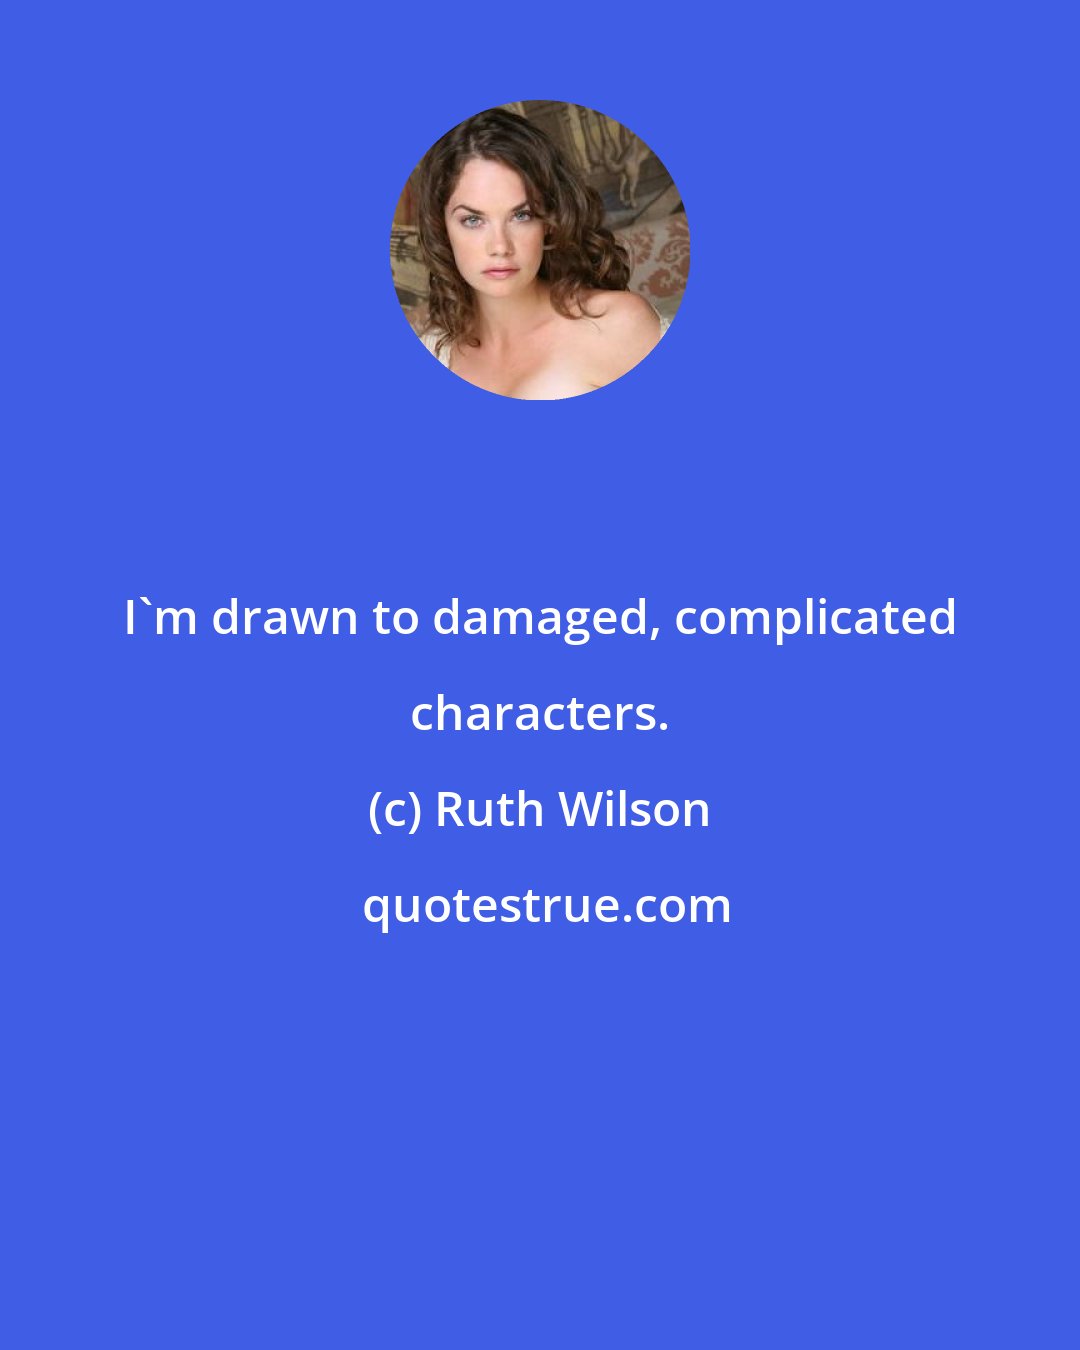 Ruth Wilson: I'm drawn to damaged, complicated characters.